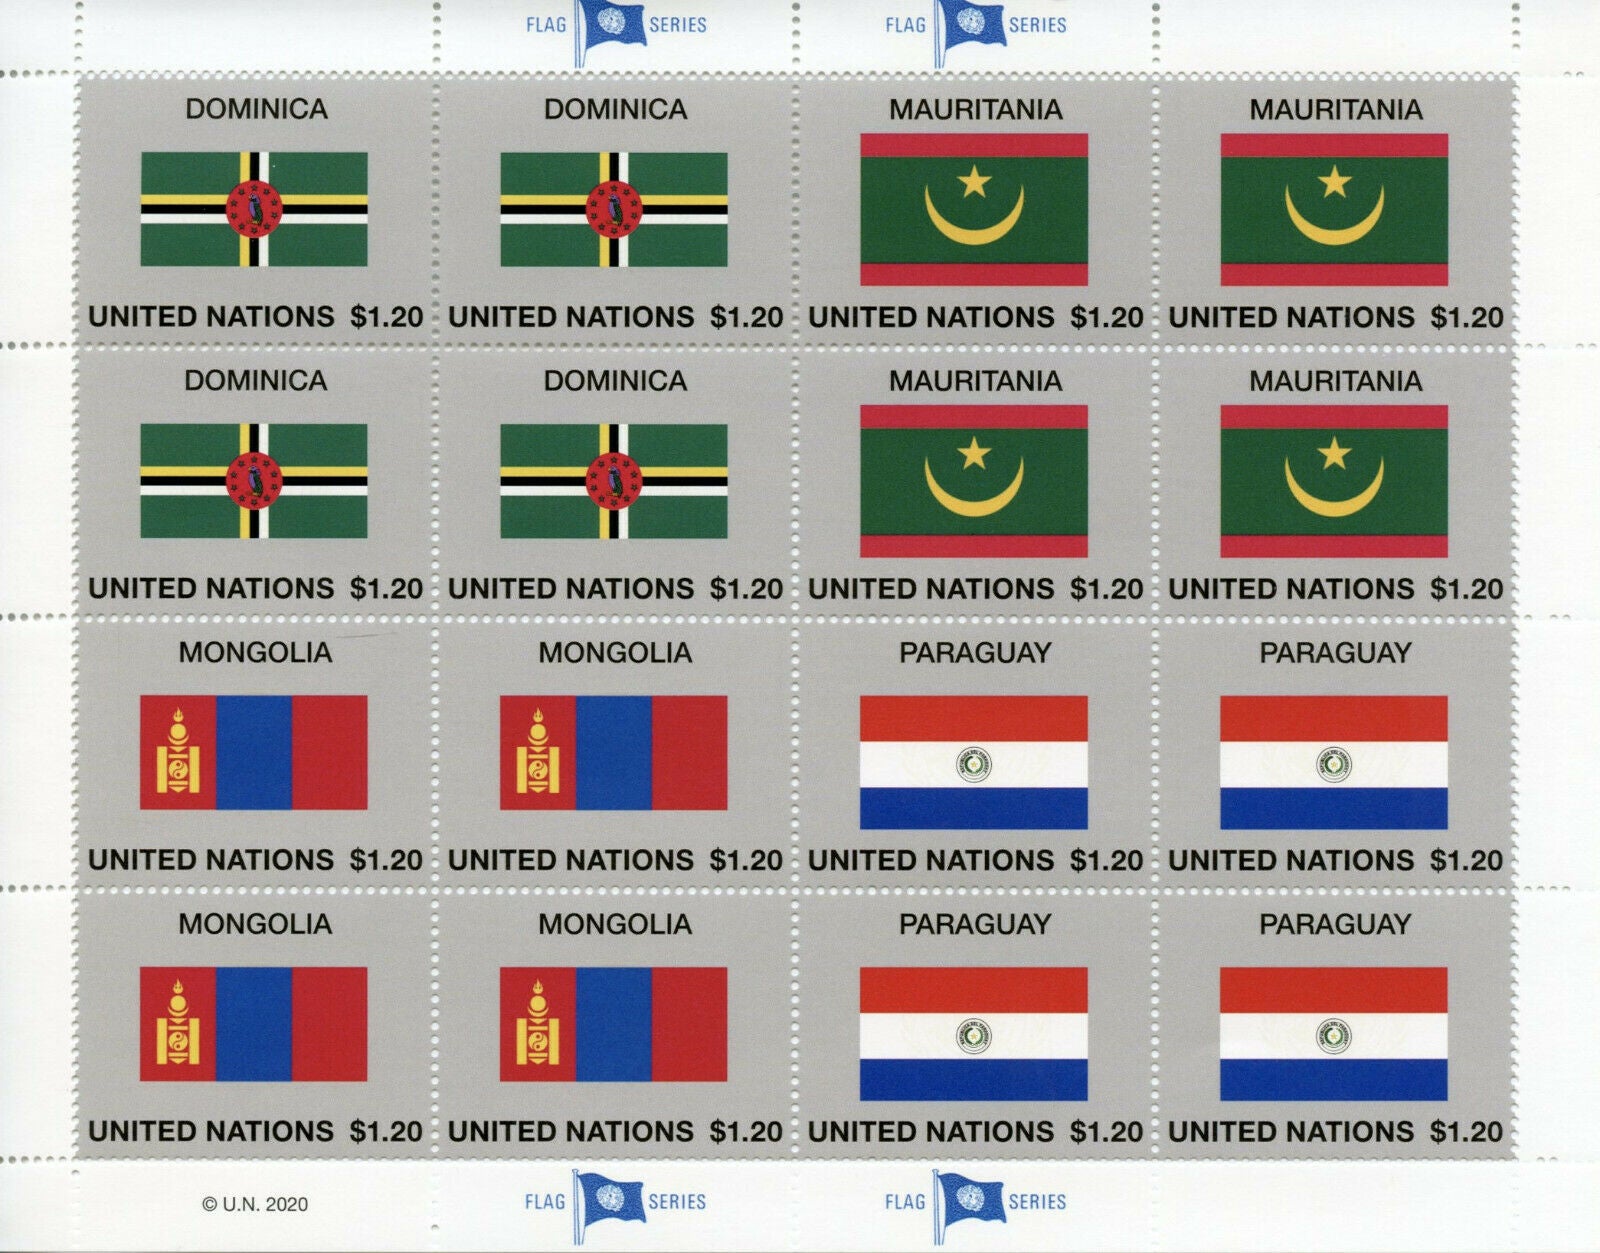 United Nations UN Flags Stamps 2020 MNH Flag Series 57 Mongolia Paraguay 16v M/S